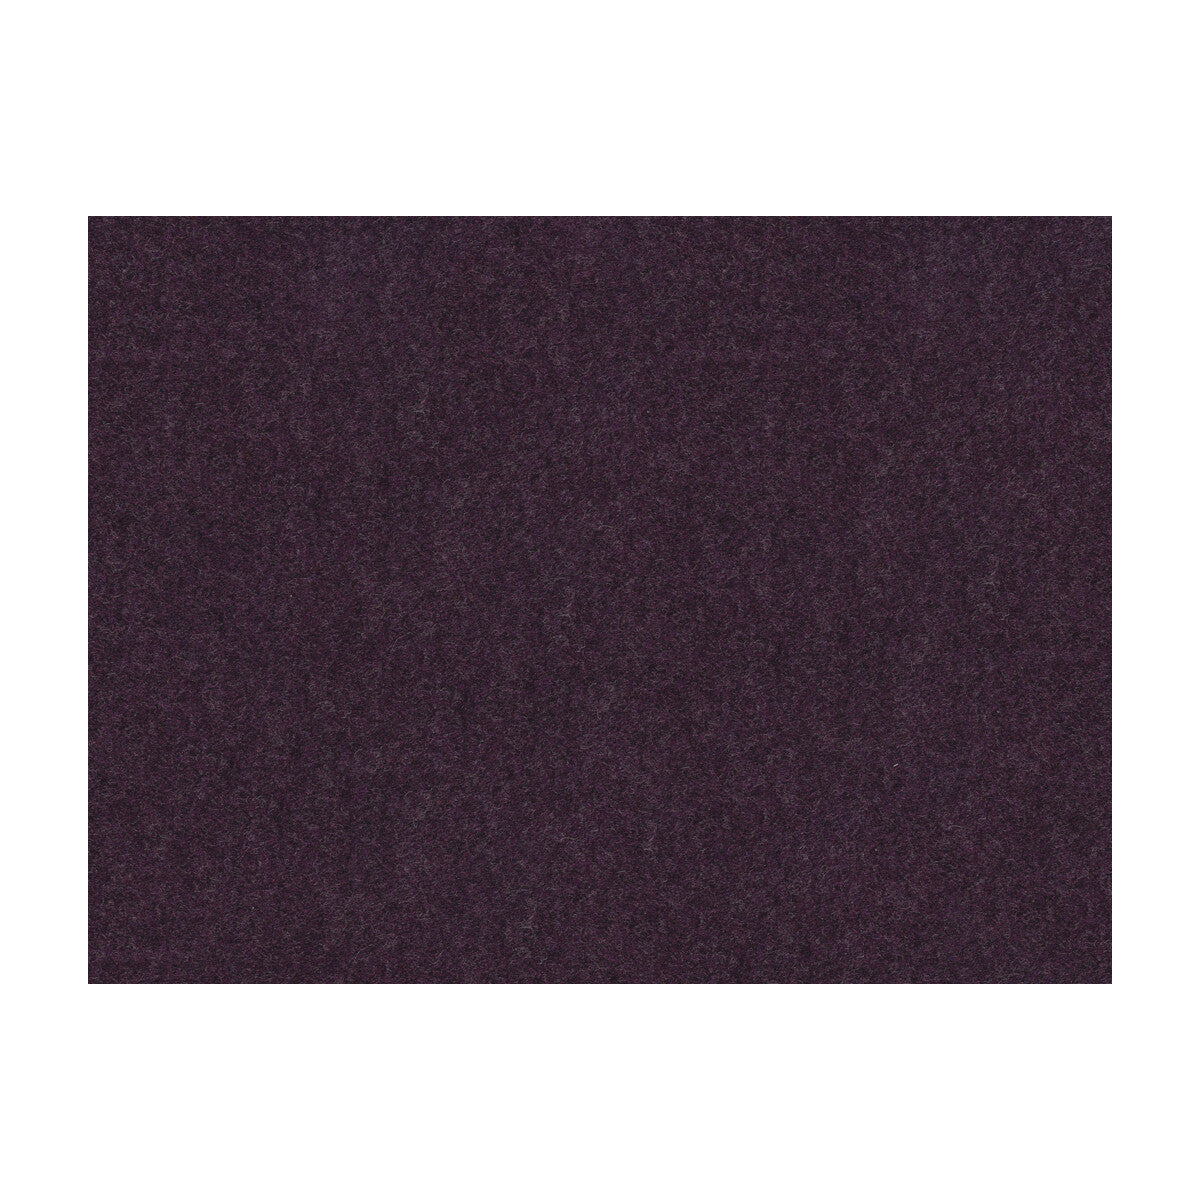 Chevalier Wool fabric in aubergine color - pattern 8013149.1011.0 - by Brunschwig &amp; Fils